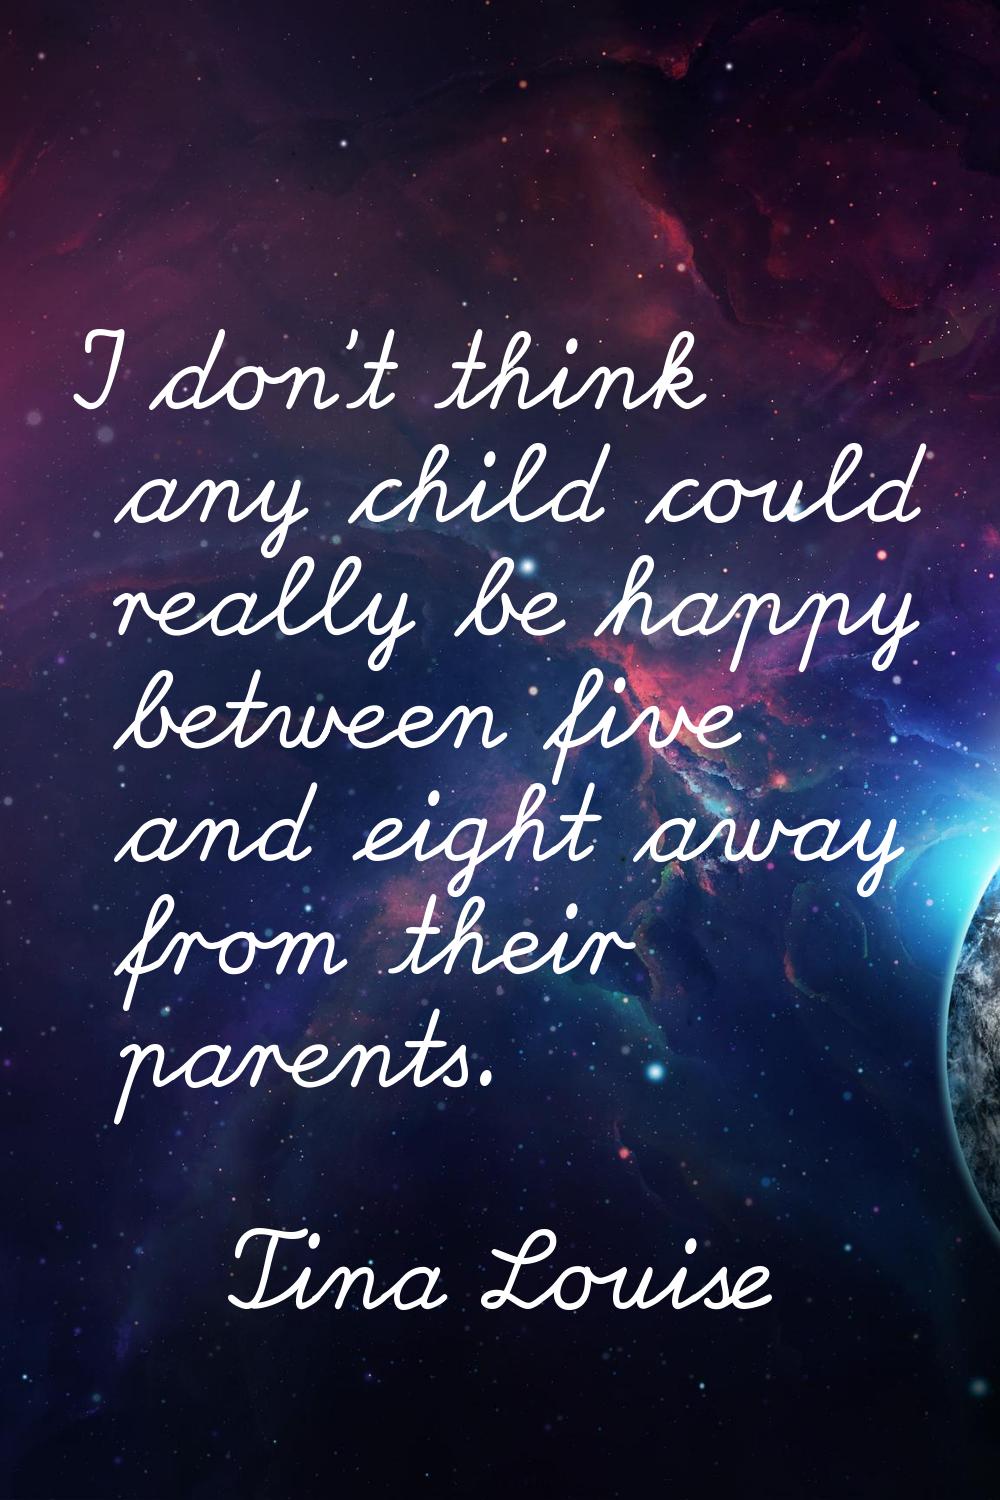 I don't think any child could really be happy between five and eight away from their parents.